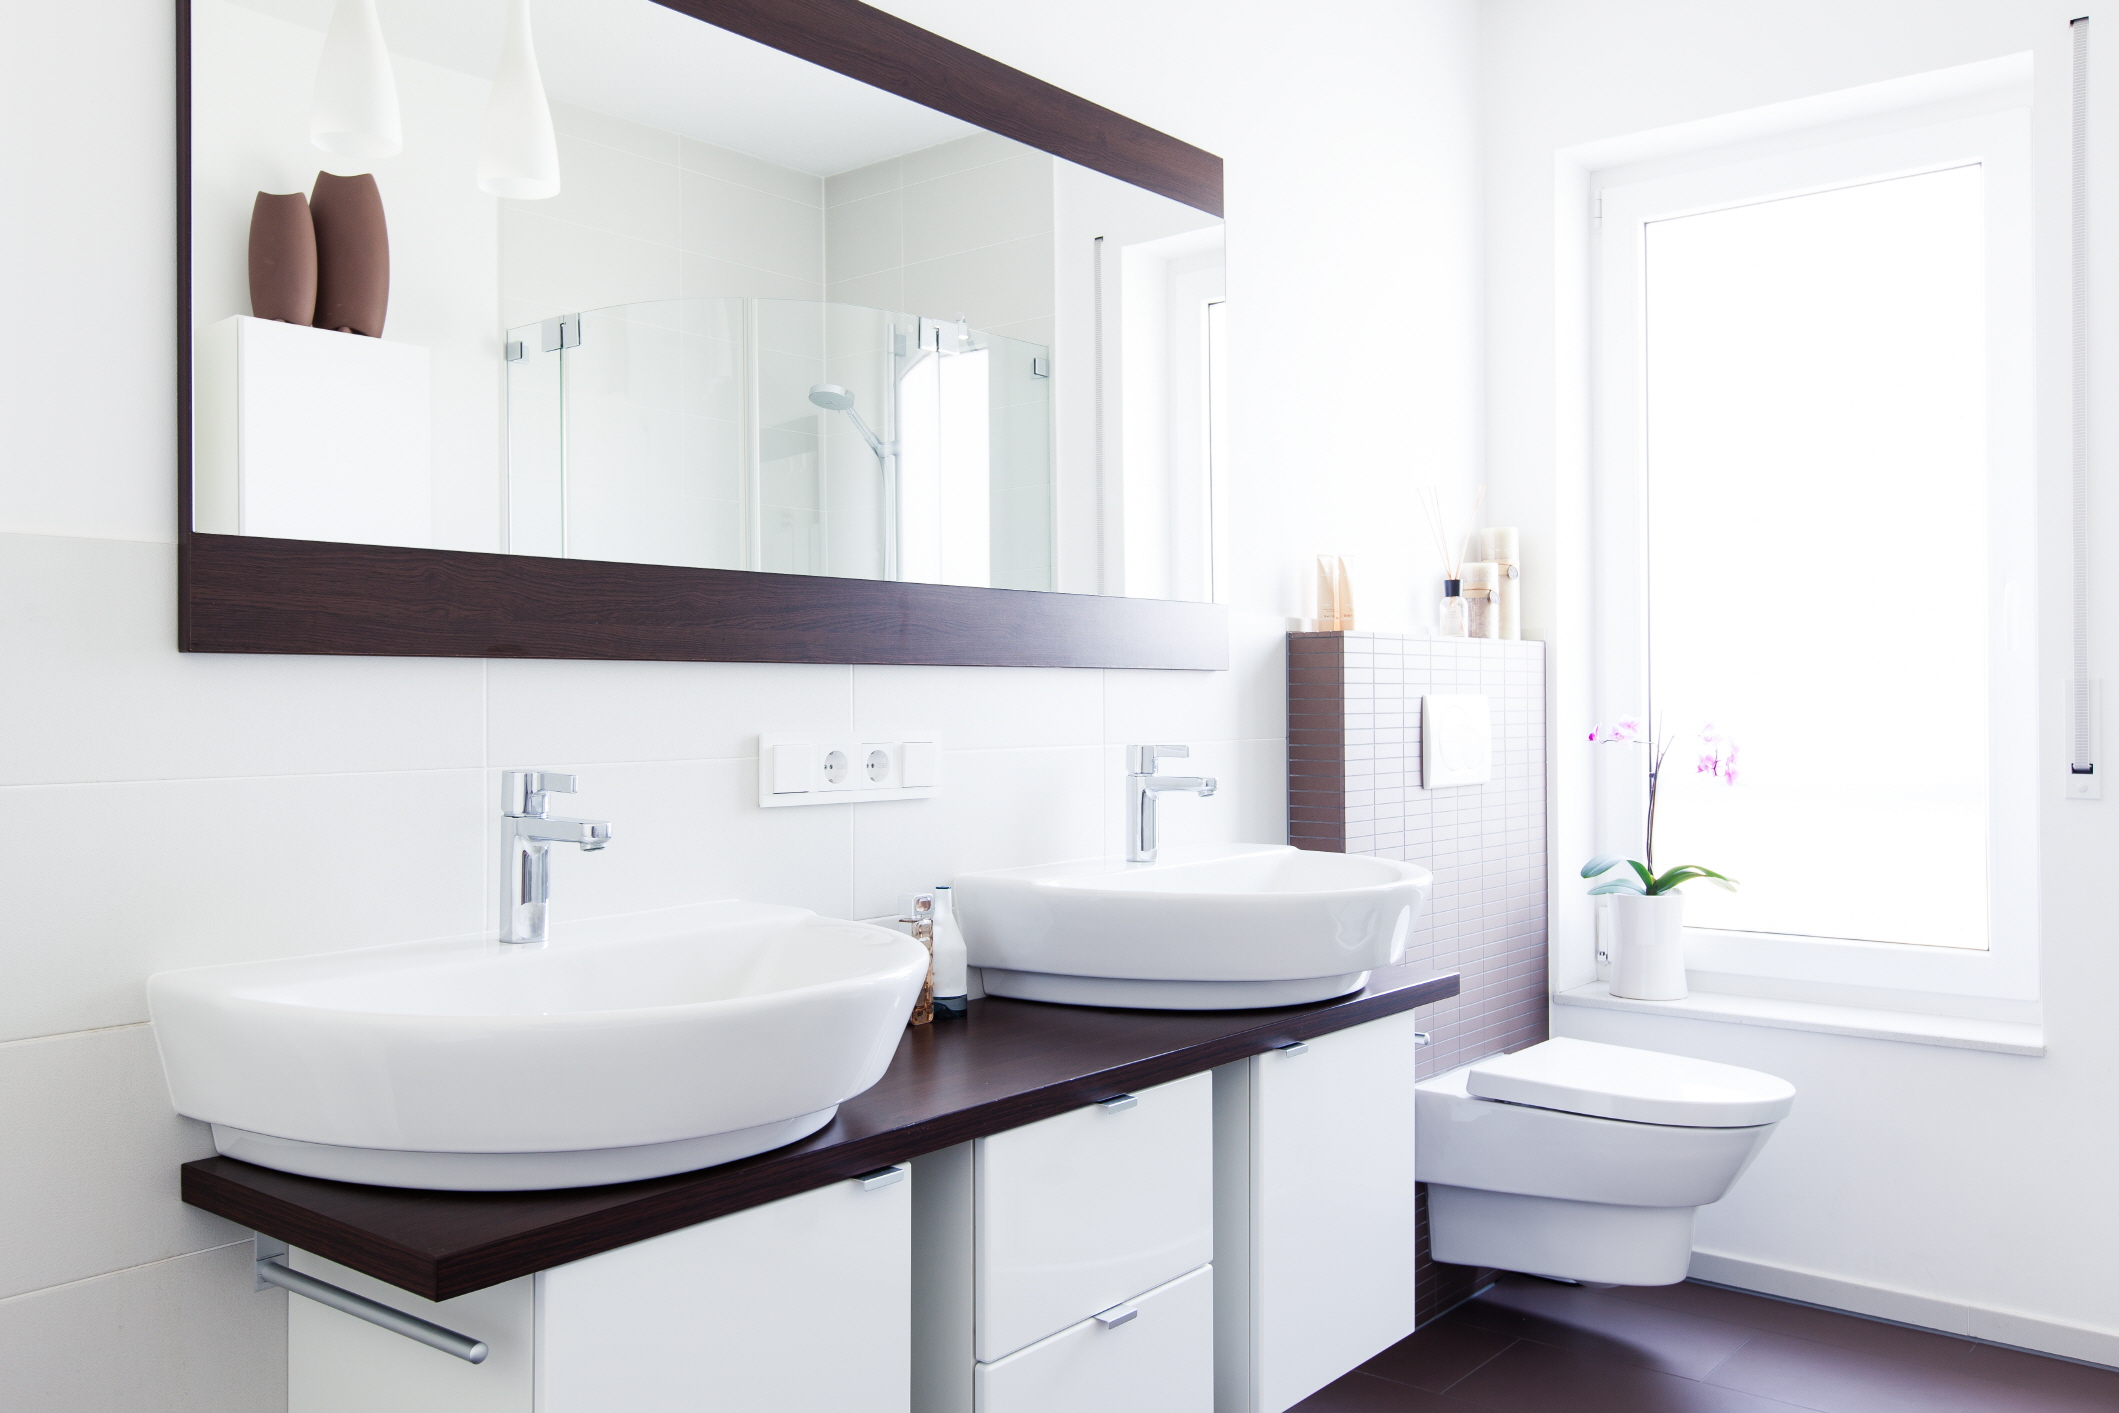 Maximize functionality with double sink vanities for a luxurious solution.